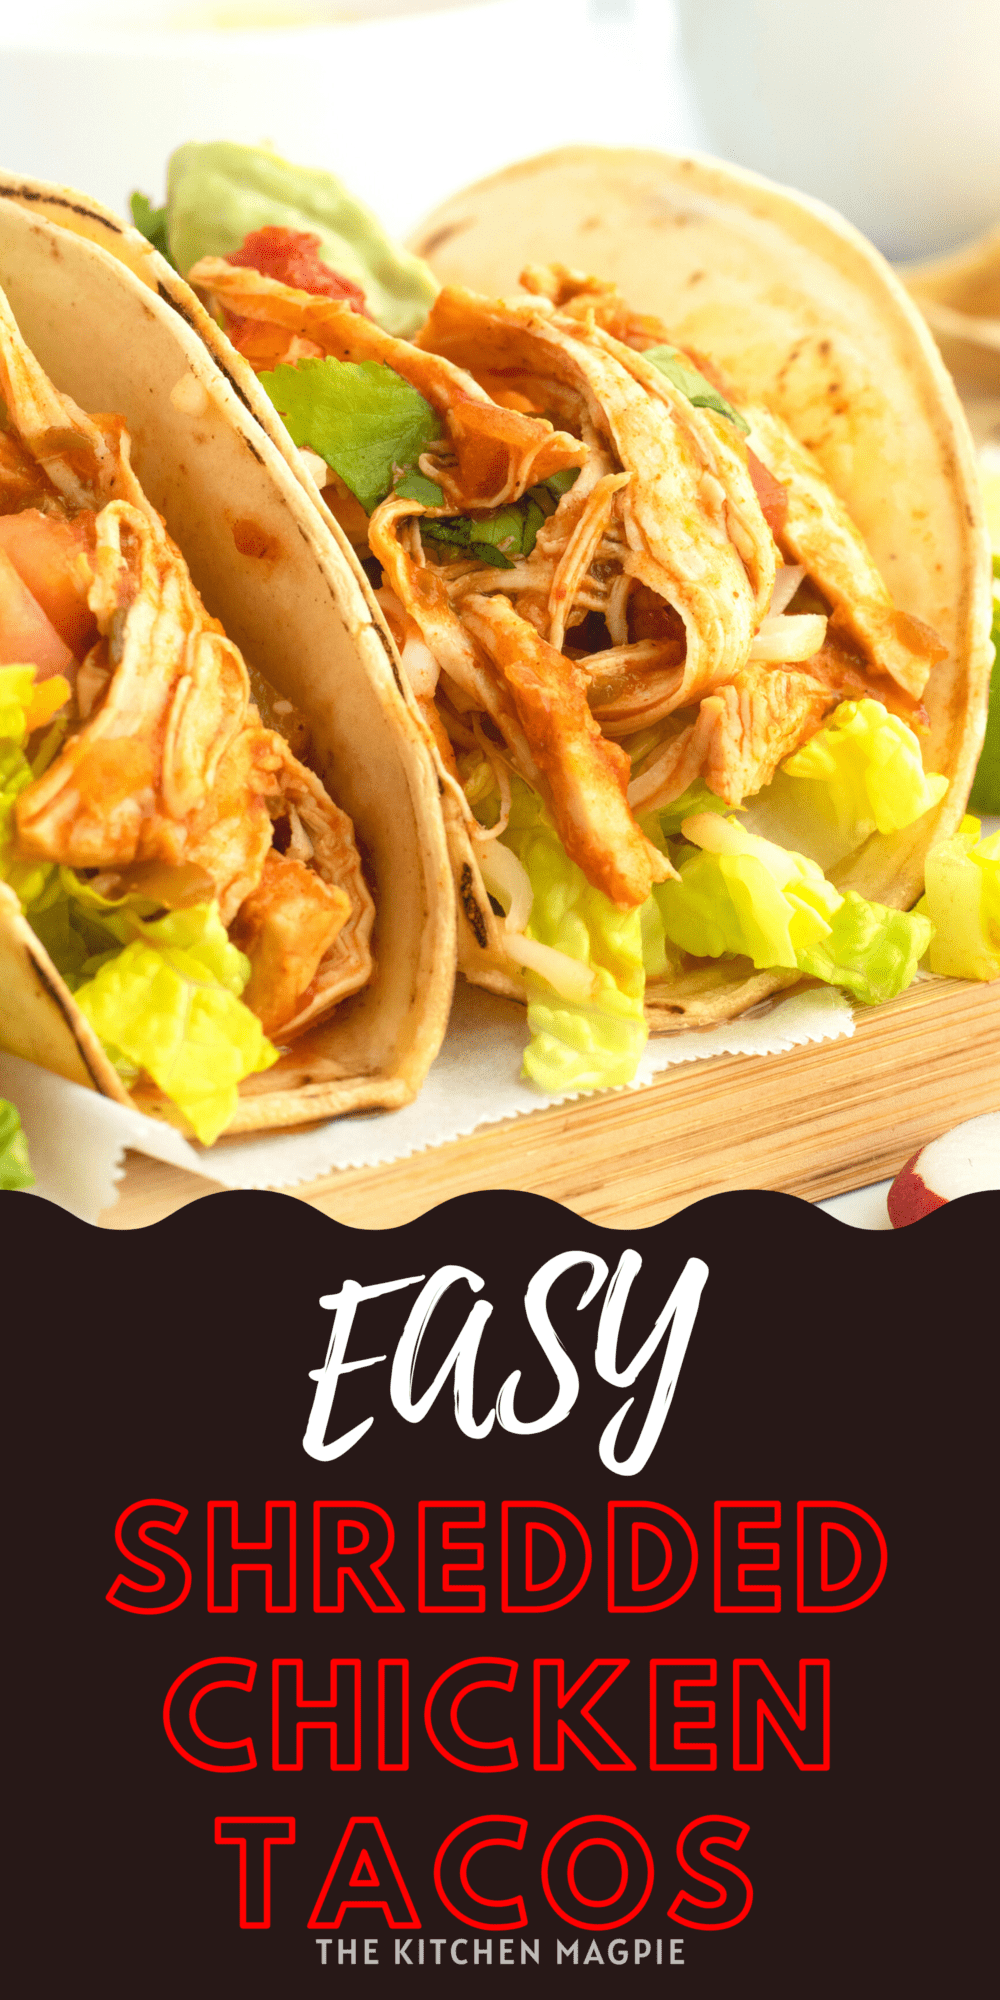 These shredded chicken tacos are the perfect easy weeknight dinner! Prep your toppings and avocado crema while the chicken cooks for an fast but incredibly delicious meal!